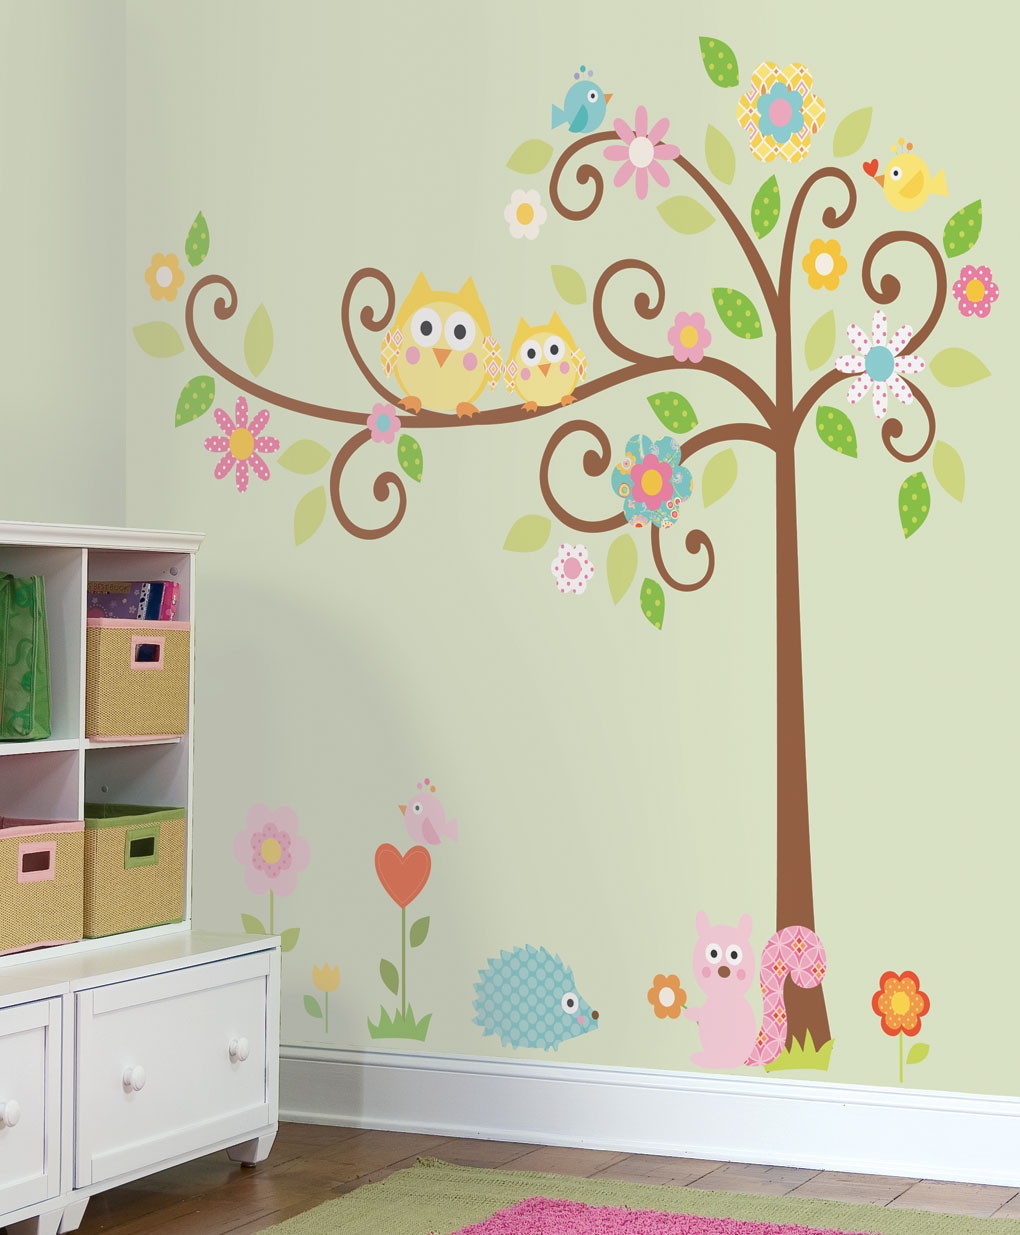 Wall Sticker For Kids Room
 Owl Wall Stickers